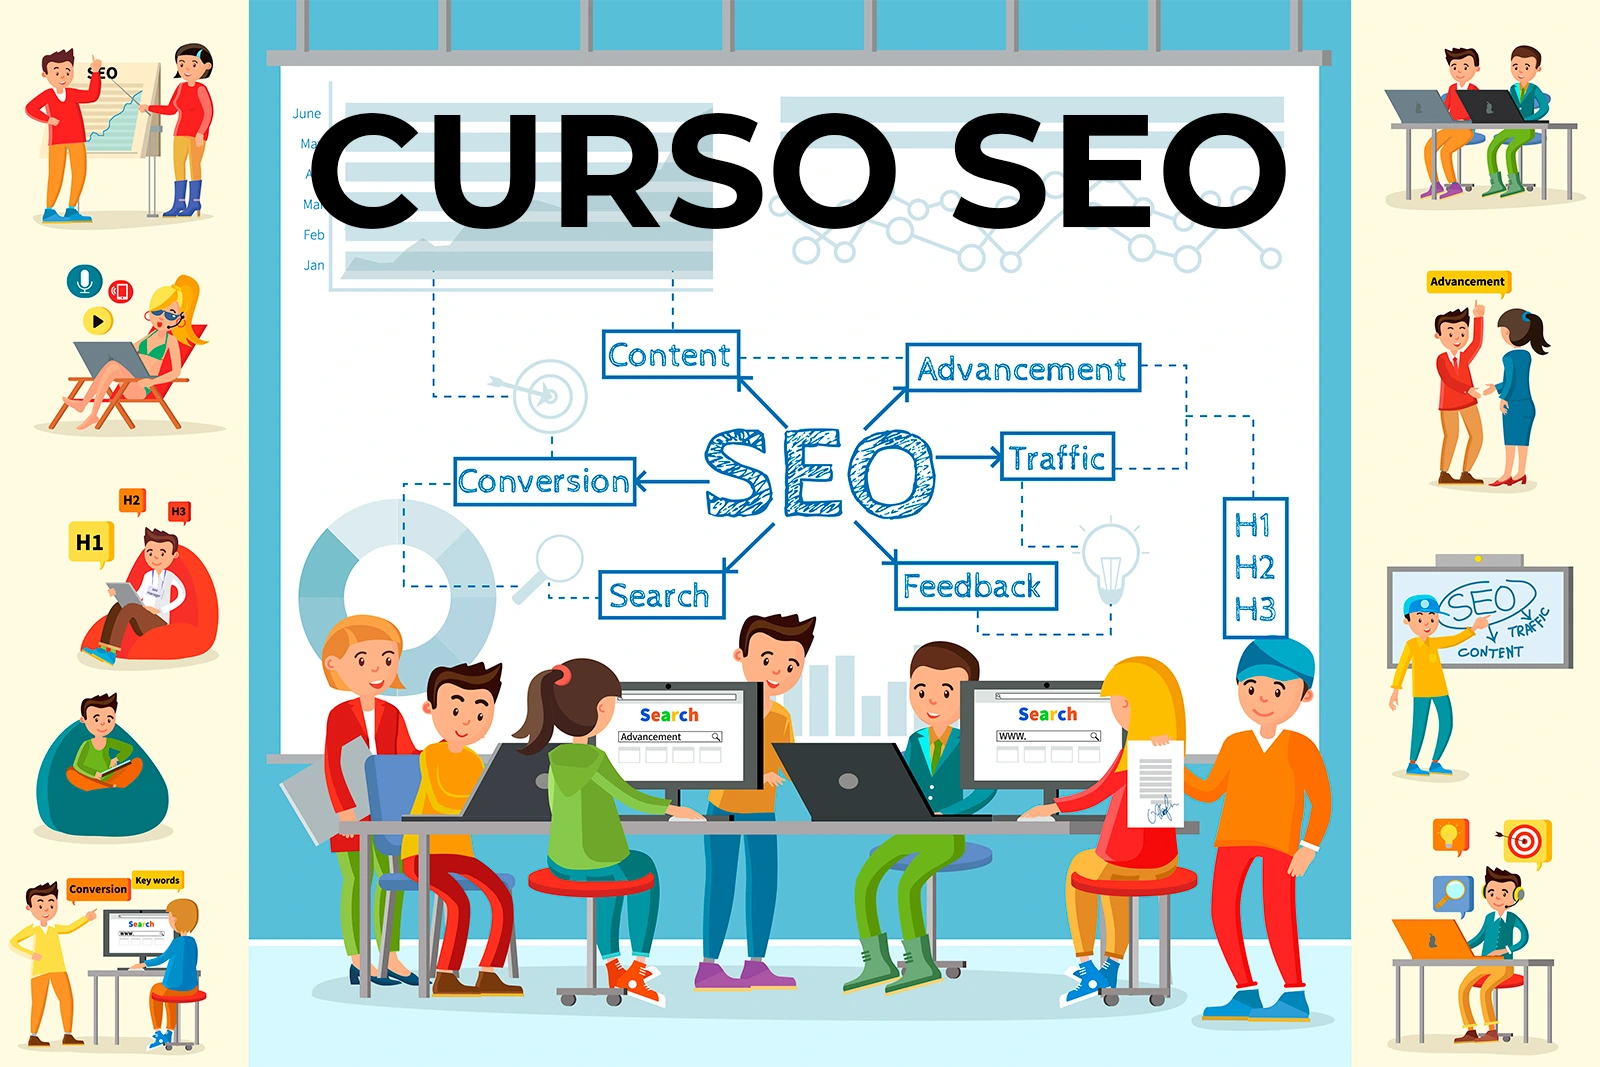 Google SEO positioning course